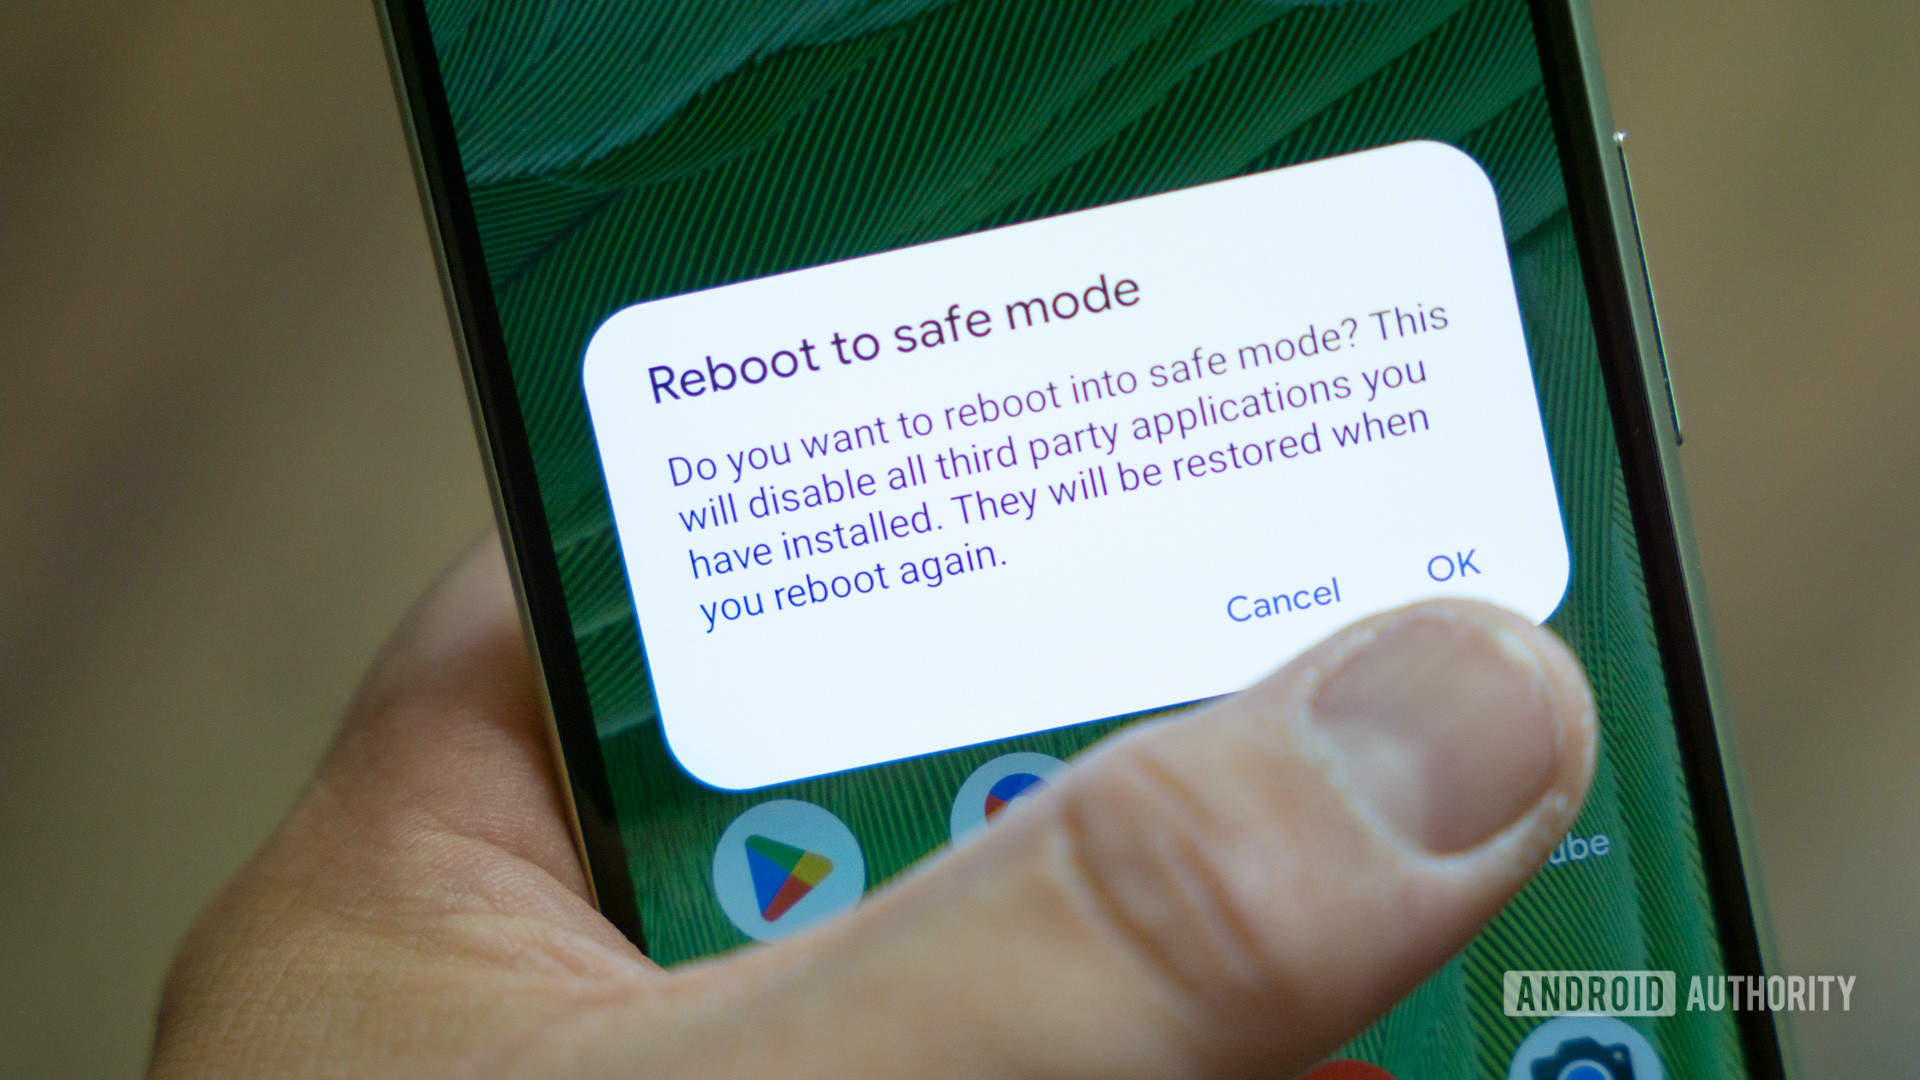 Reboot on safe mode Android stock photo (1)